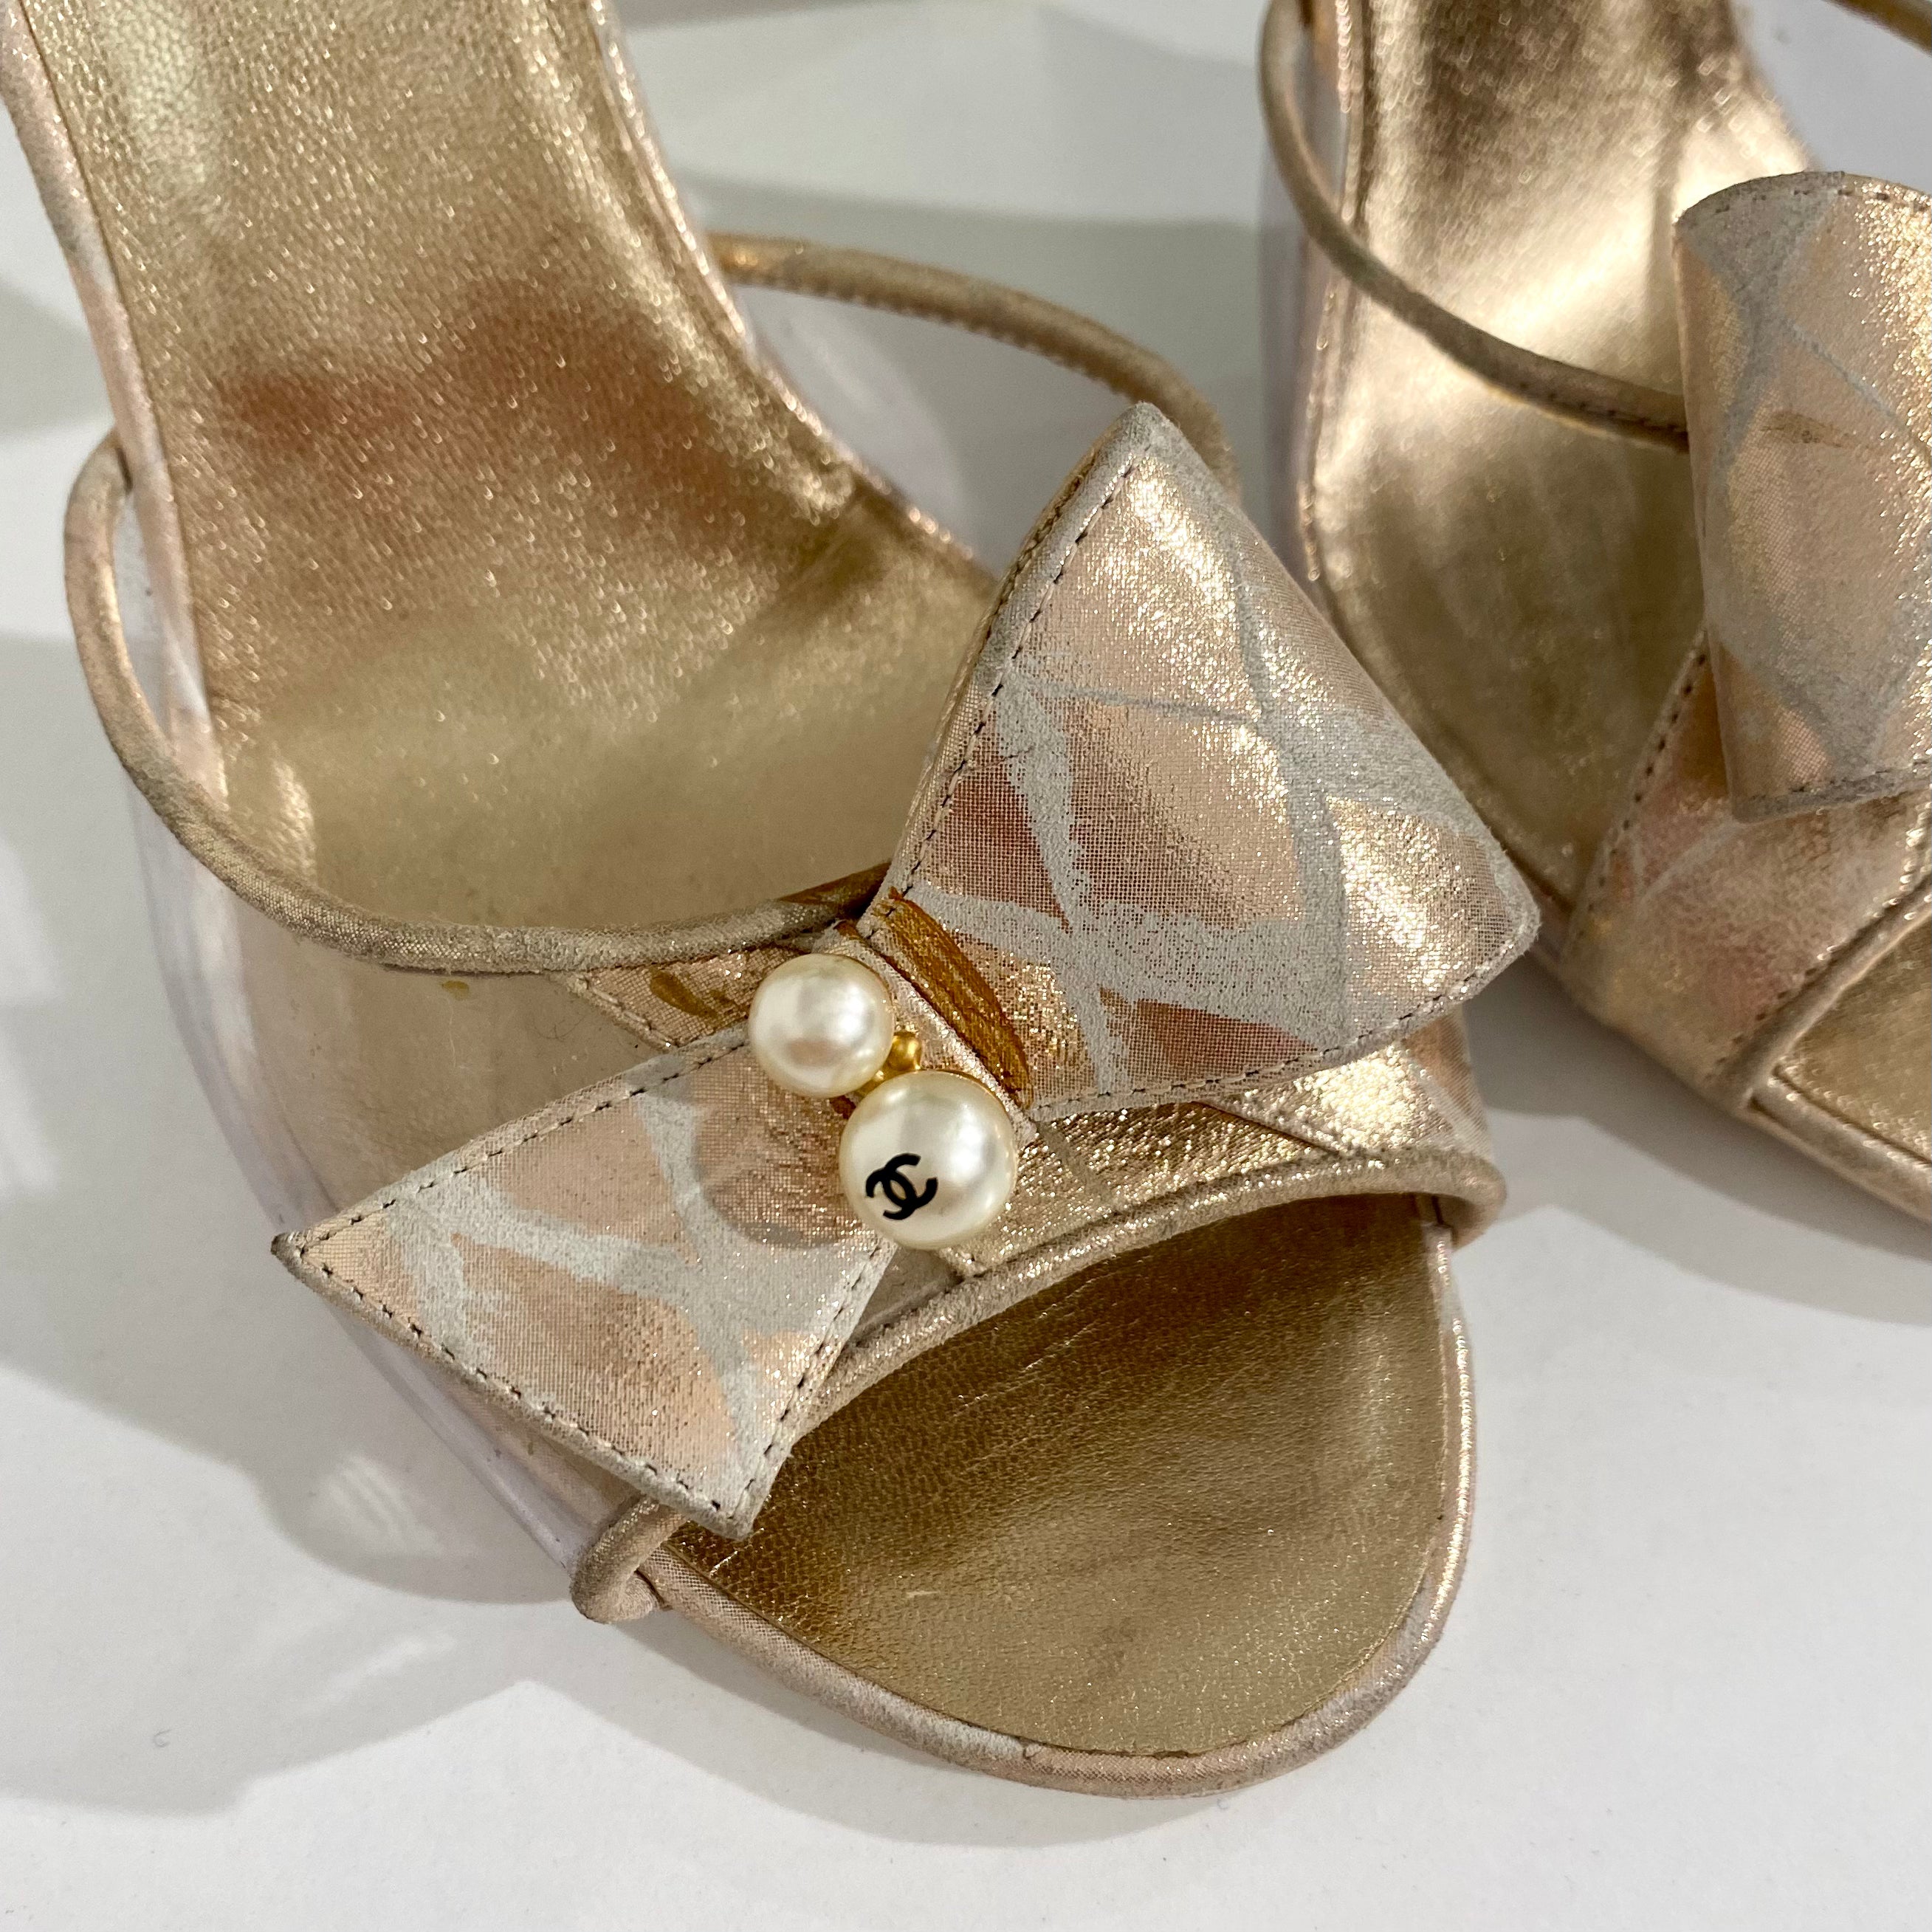 CHANEL, Shoes, Chanel Crystal Bow Pumps G356 Size 9